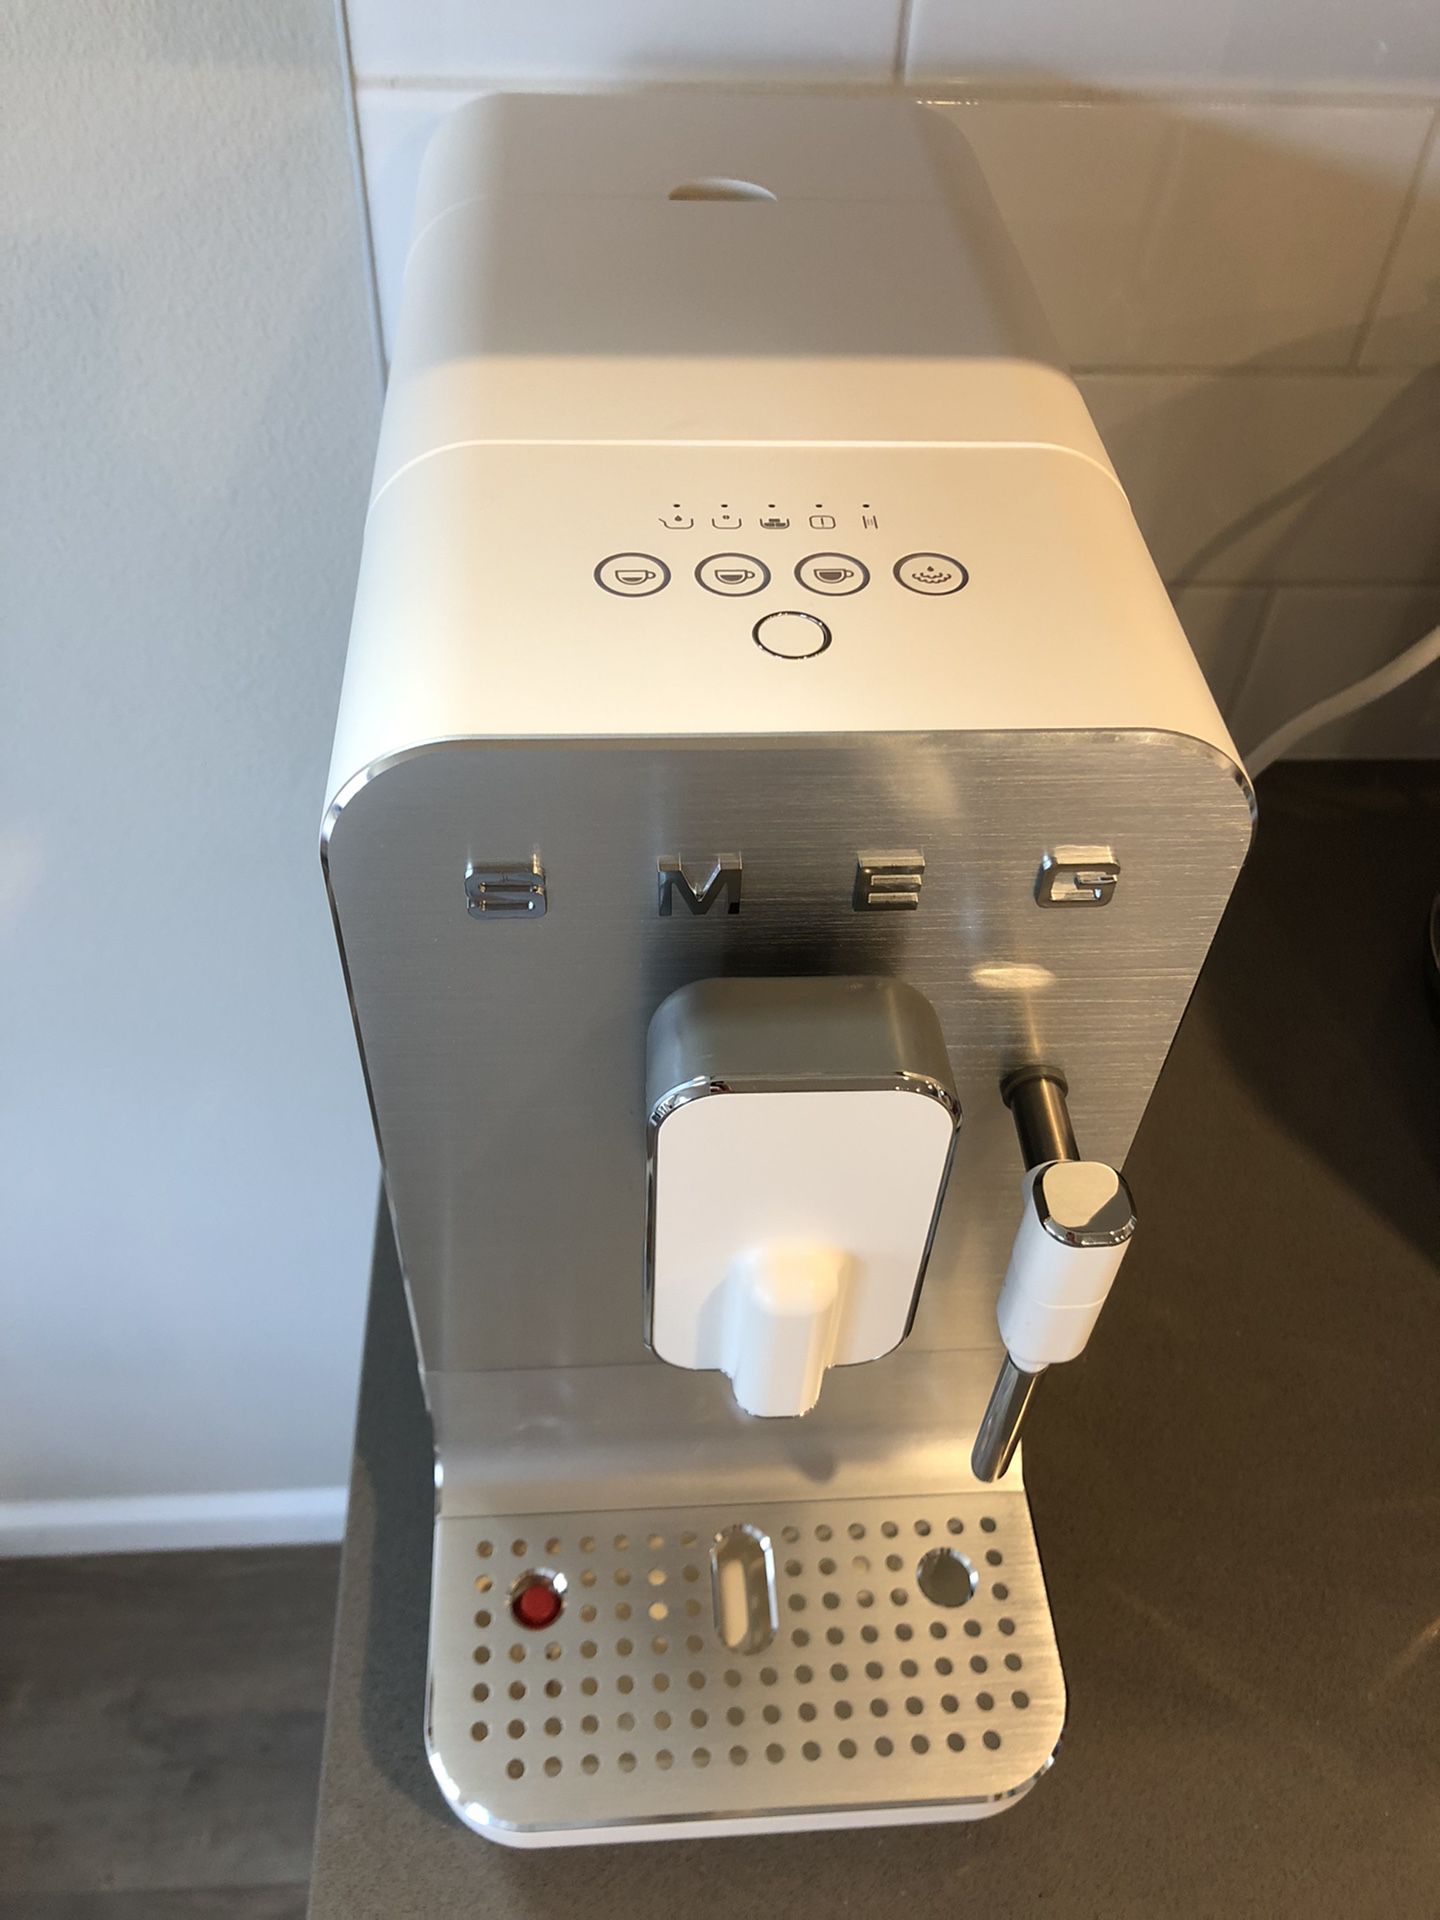 Breville milk cafe milk frother for Sale in Camas, WA - OfferUp